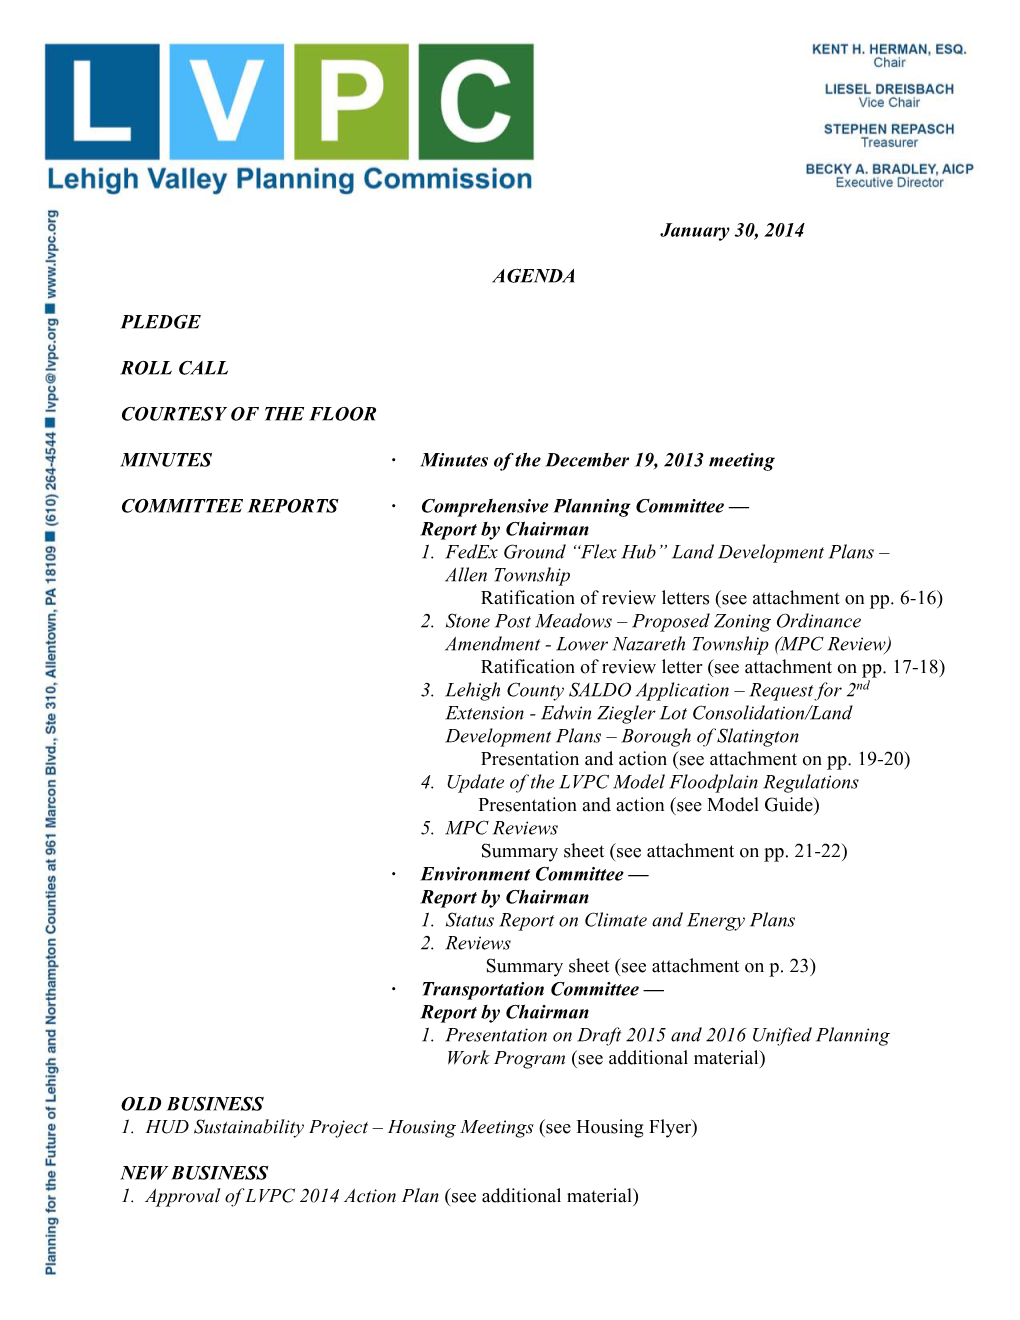 Minutes of the December 19, 2013 Meeting COMMITTEE